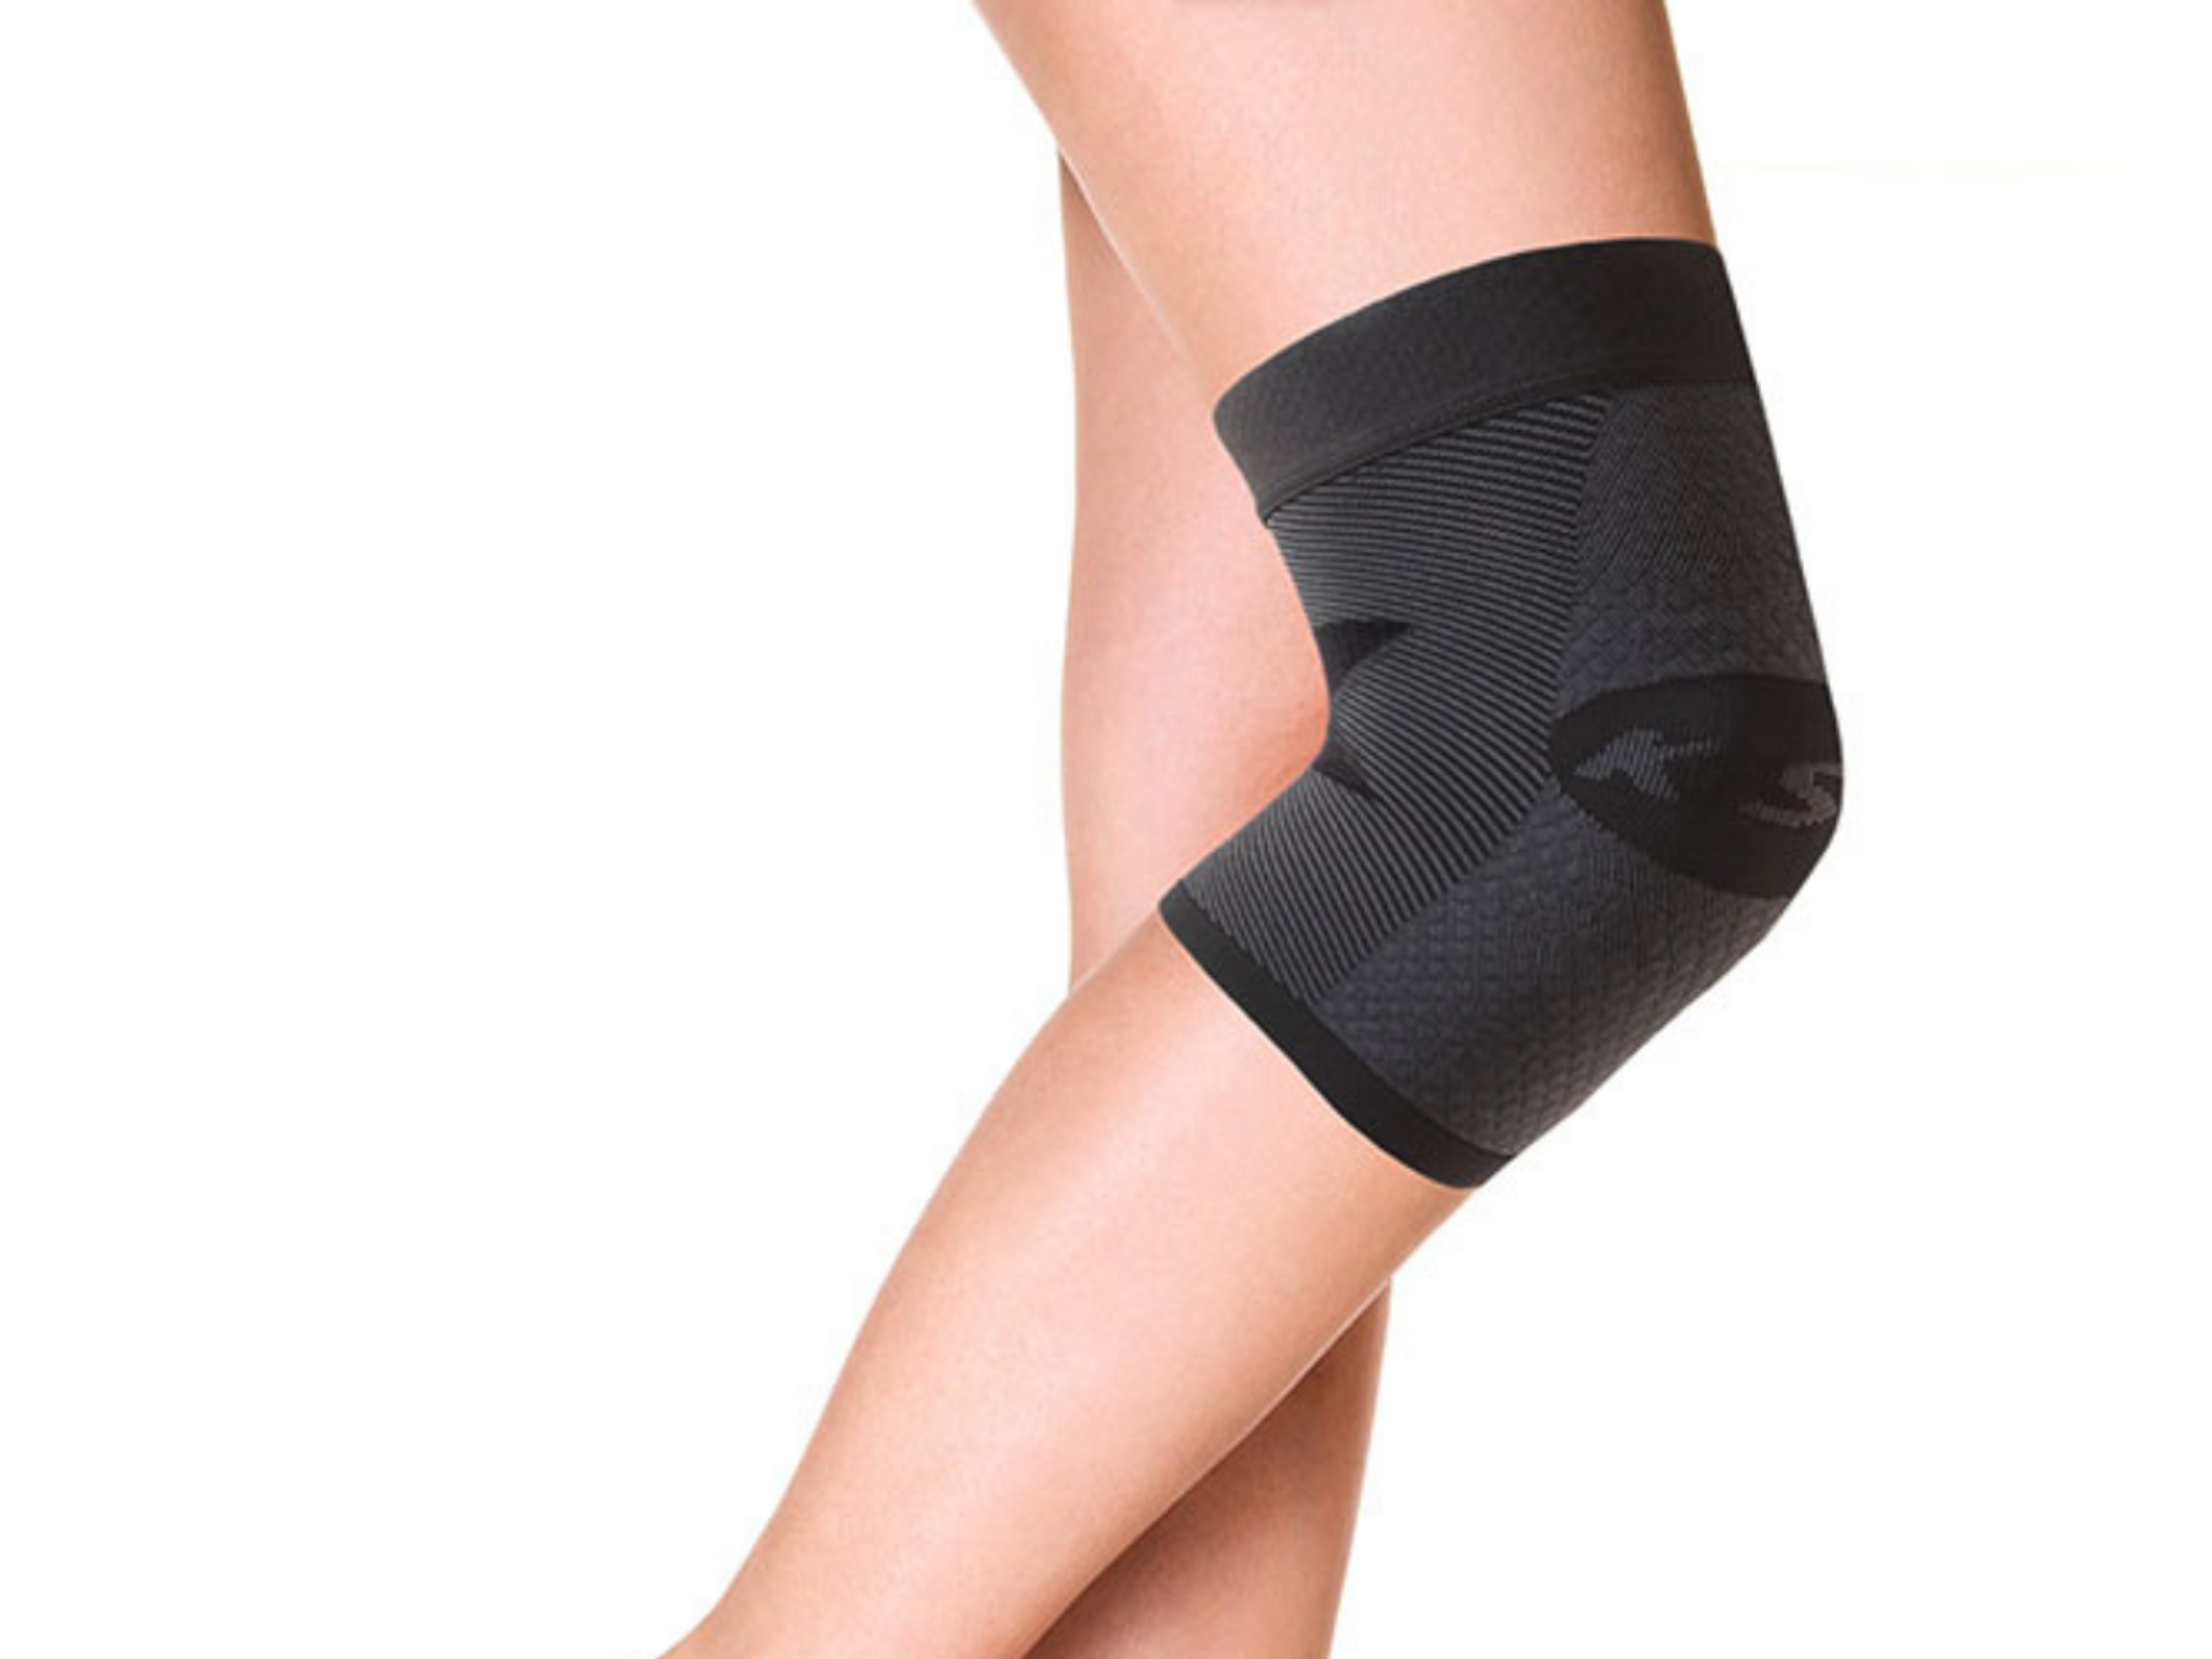 Knee support sleeves can help improve your proprioception after a meniscus tear.